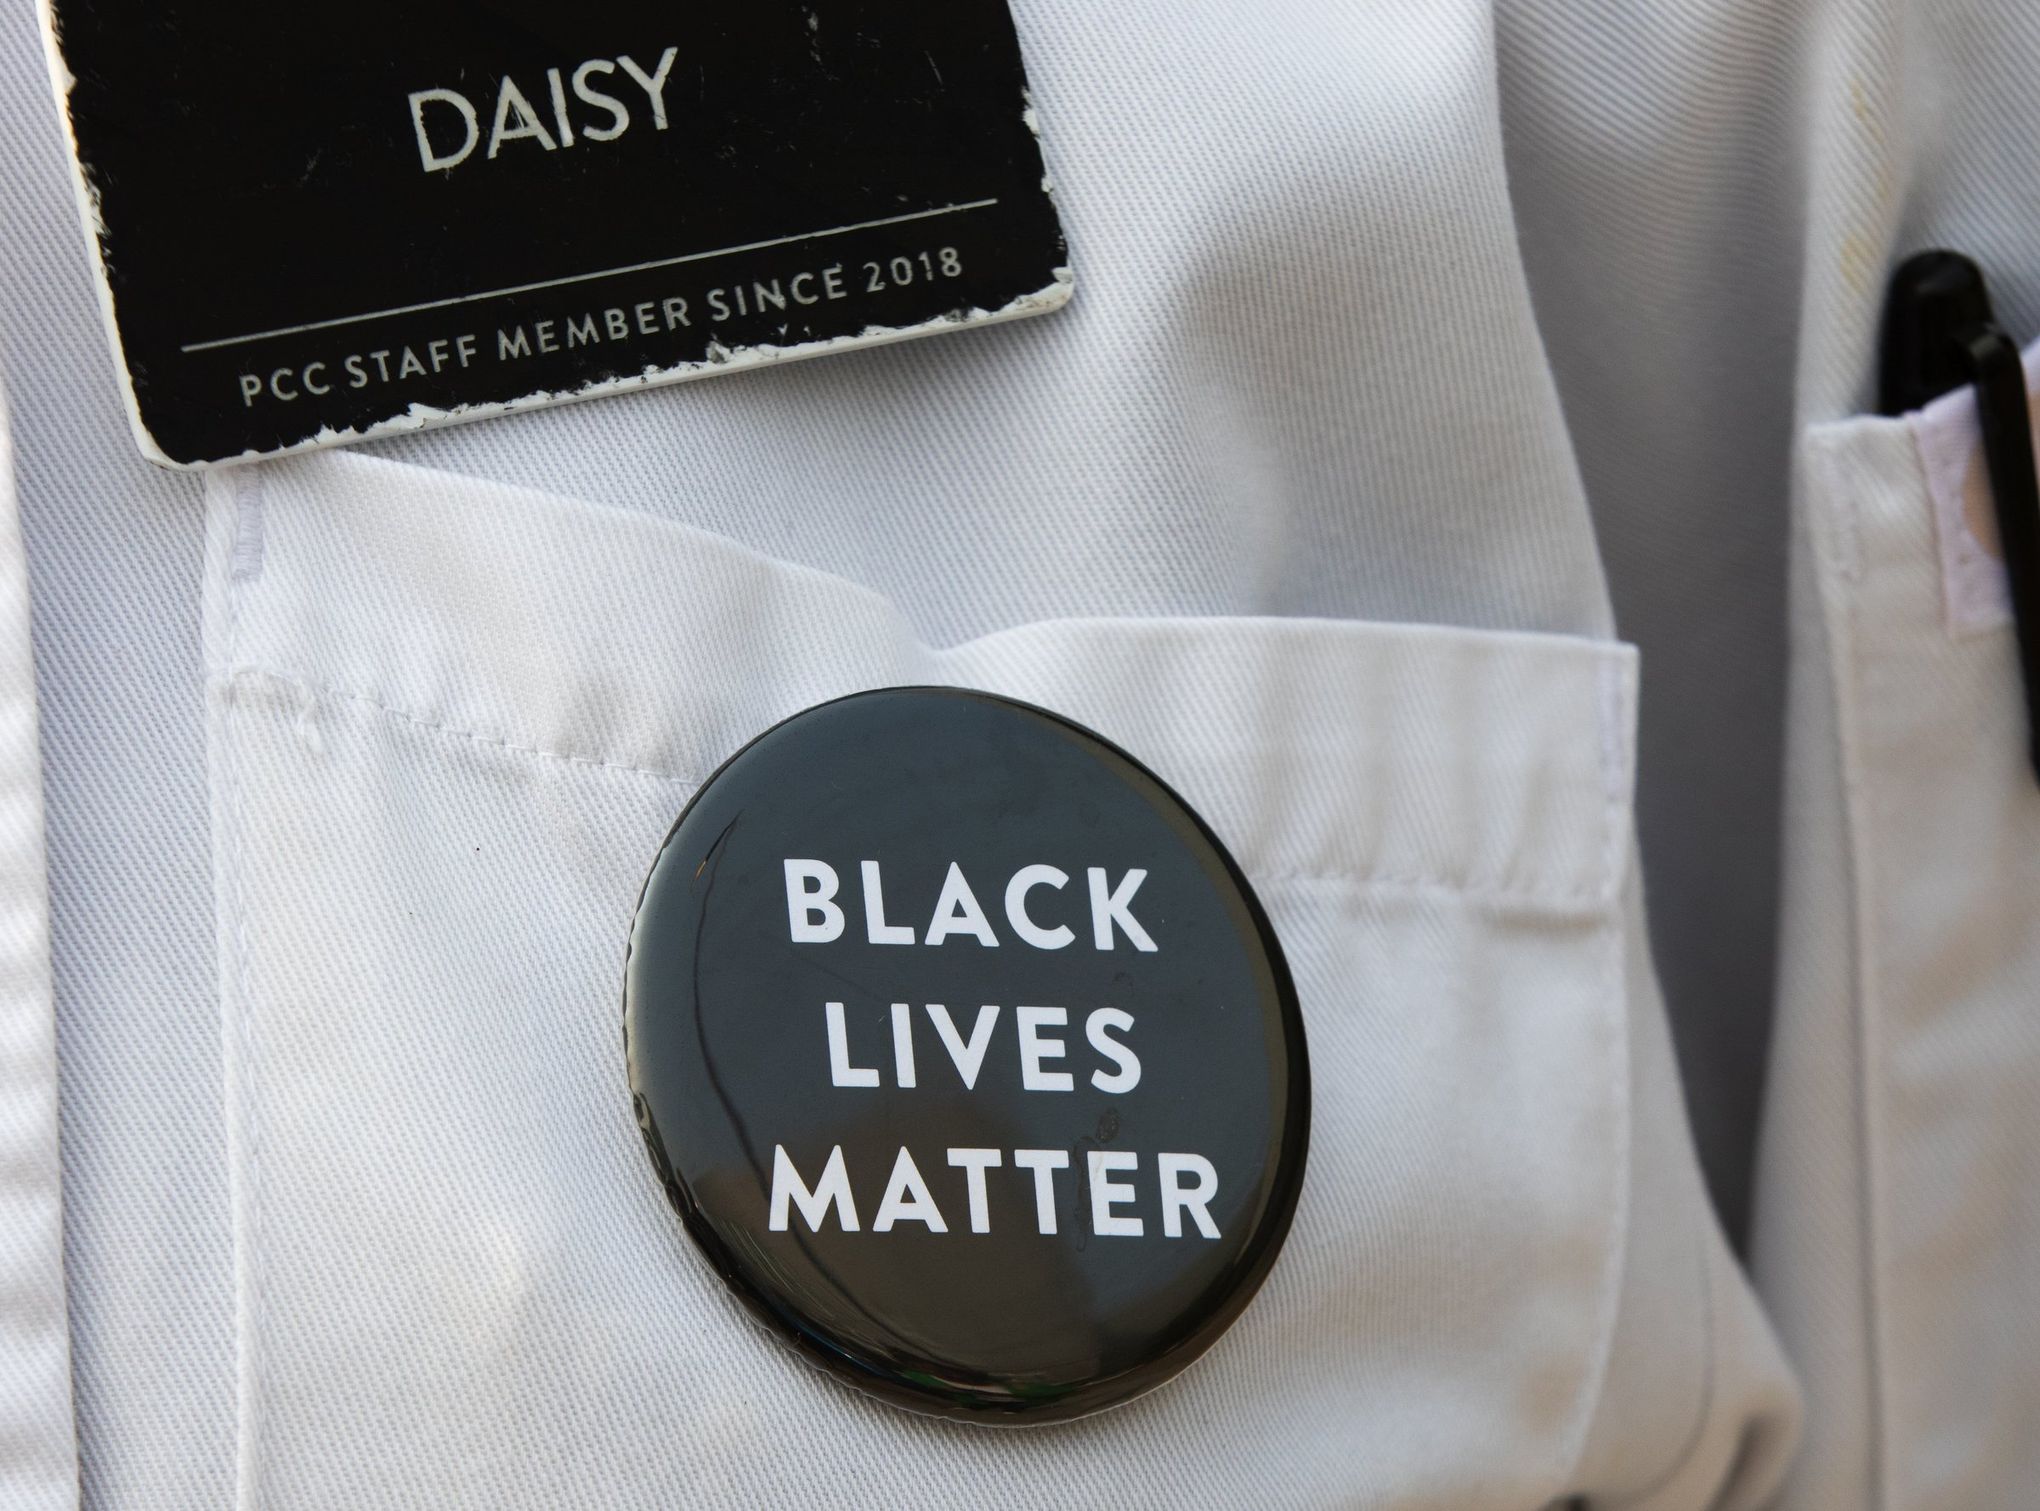 Black Lives Matter logos in the workplace divide employers, workers